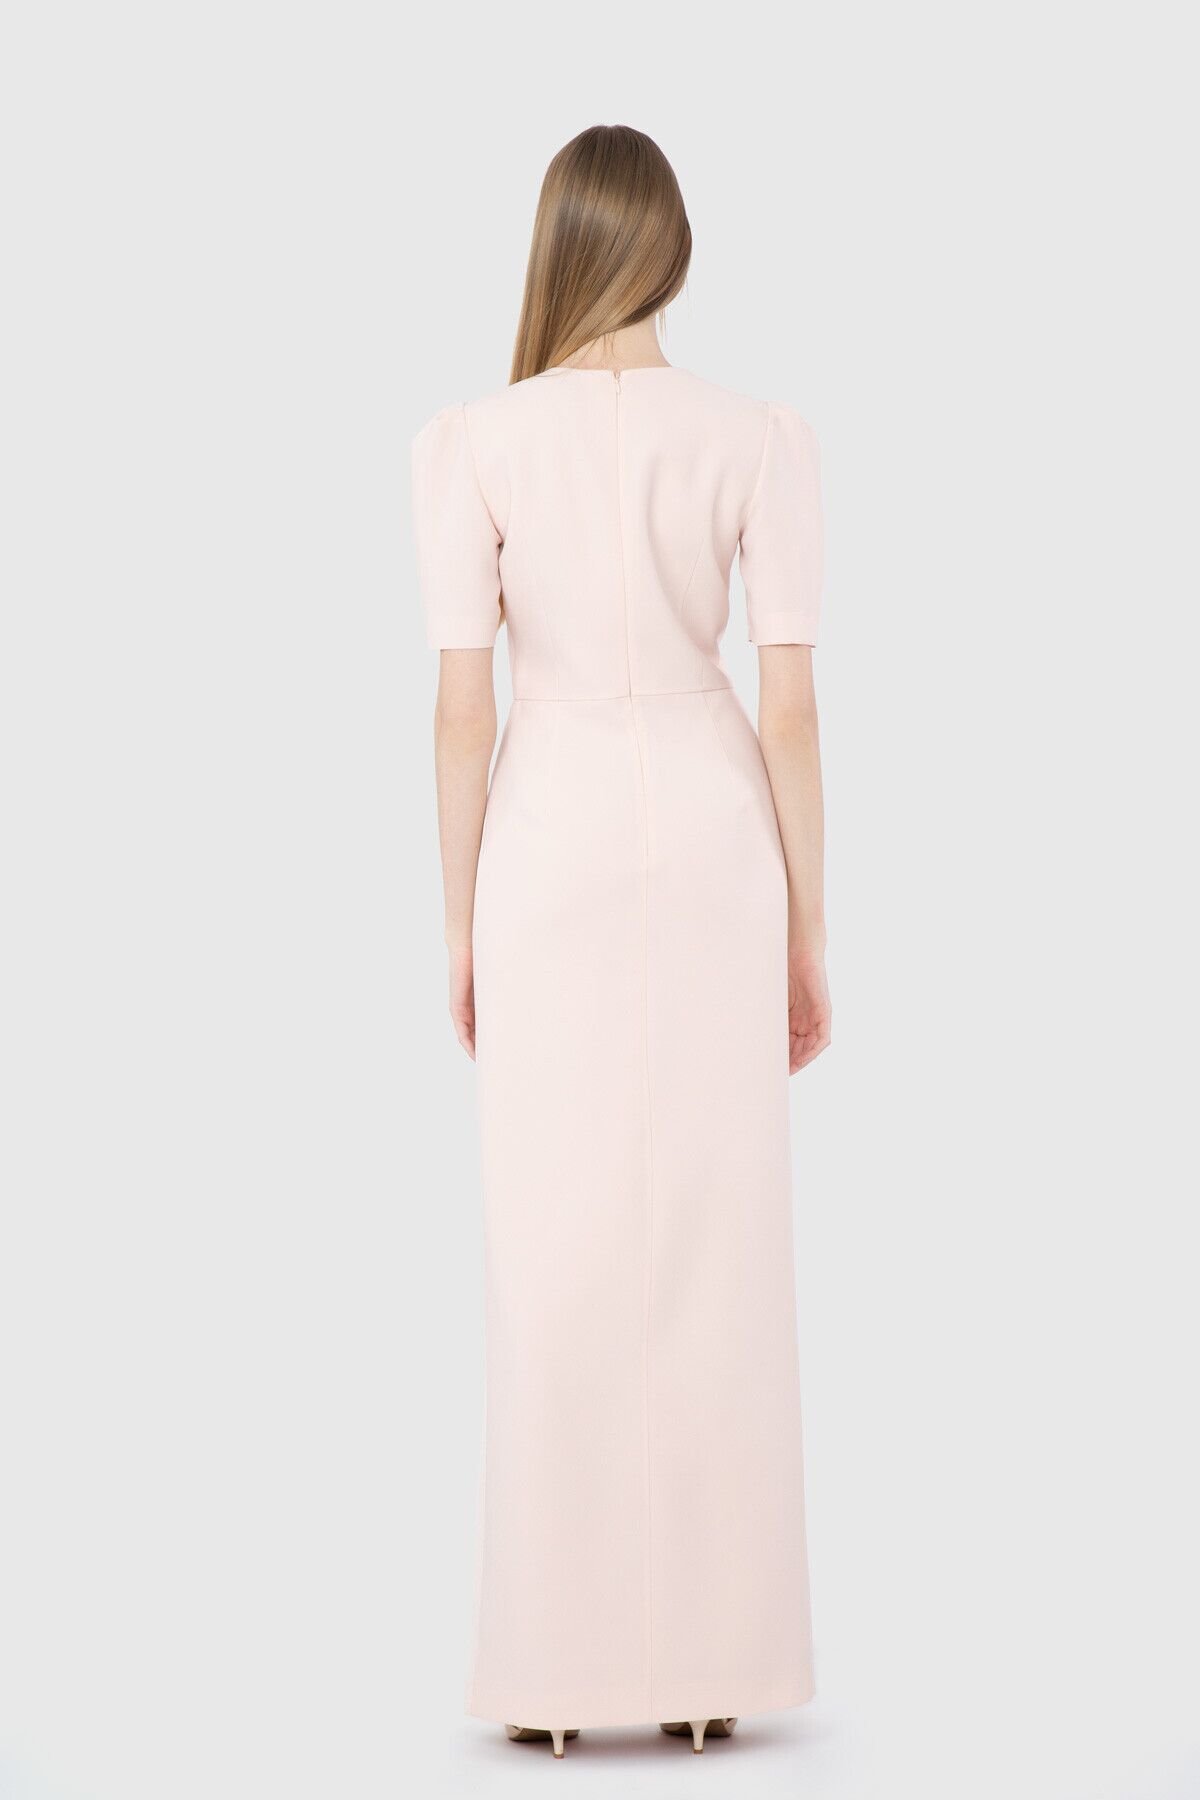 Front Double Slit Embroidered Detailed Pink Evening Dress